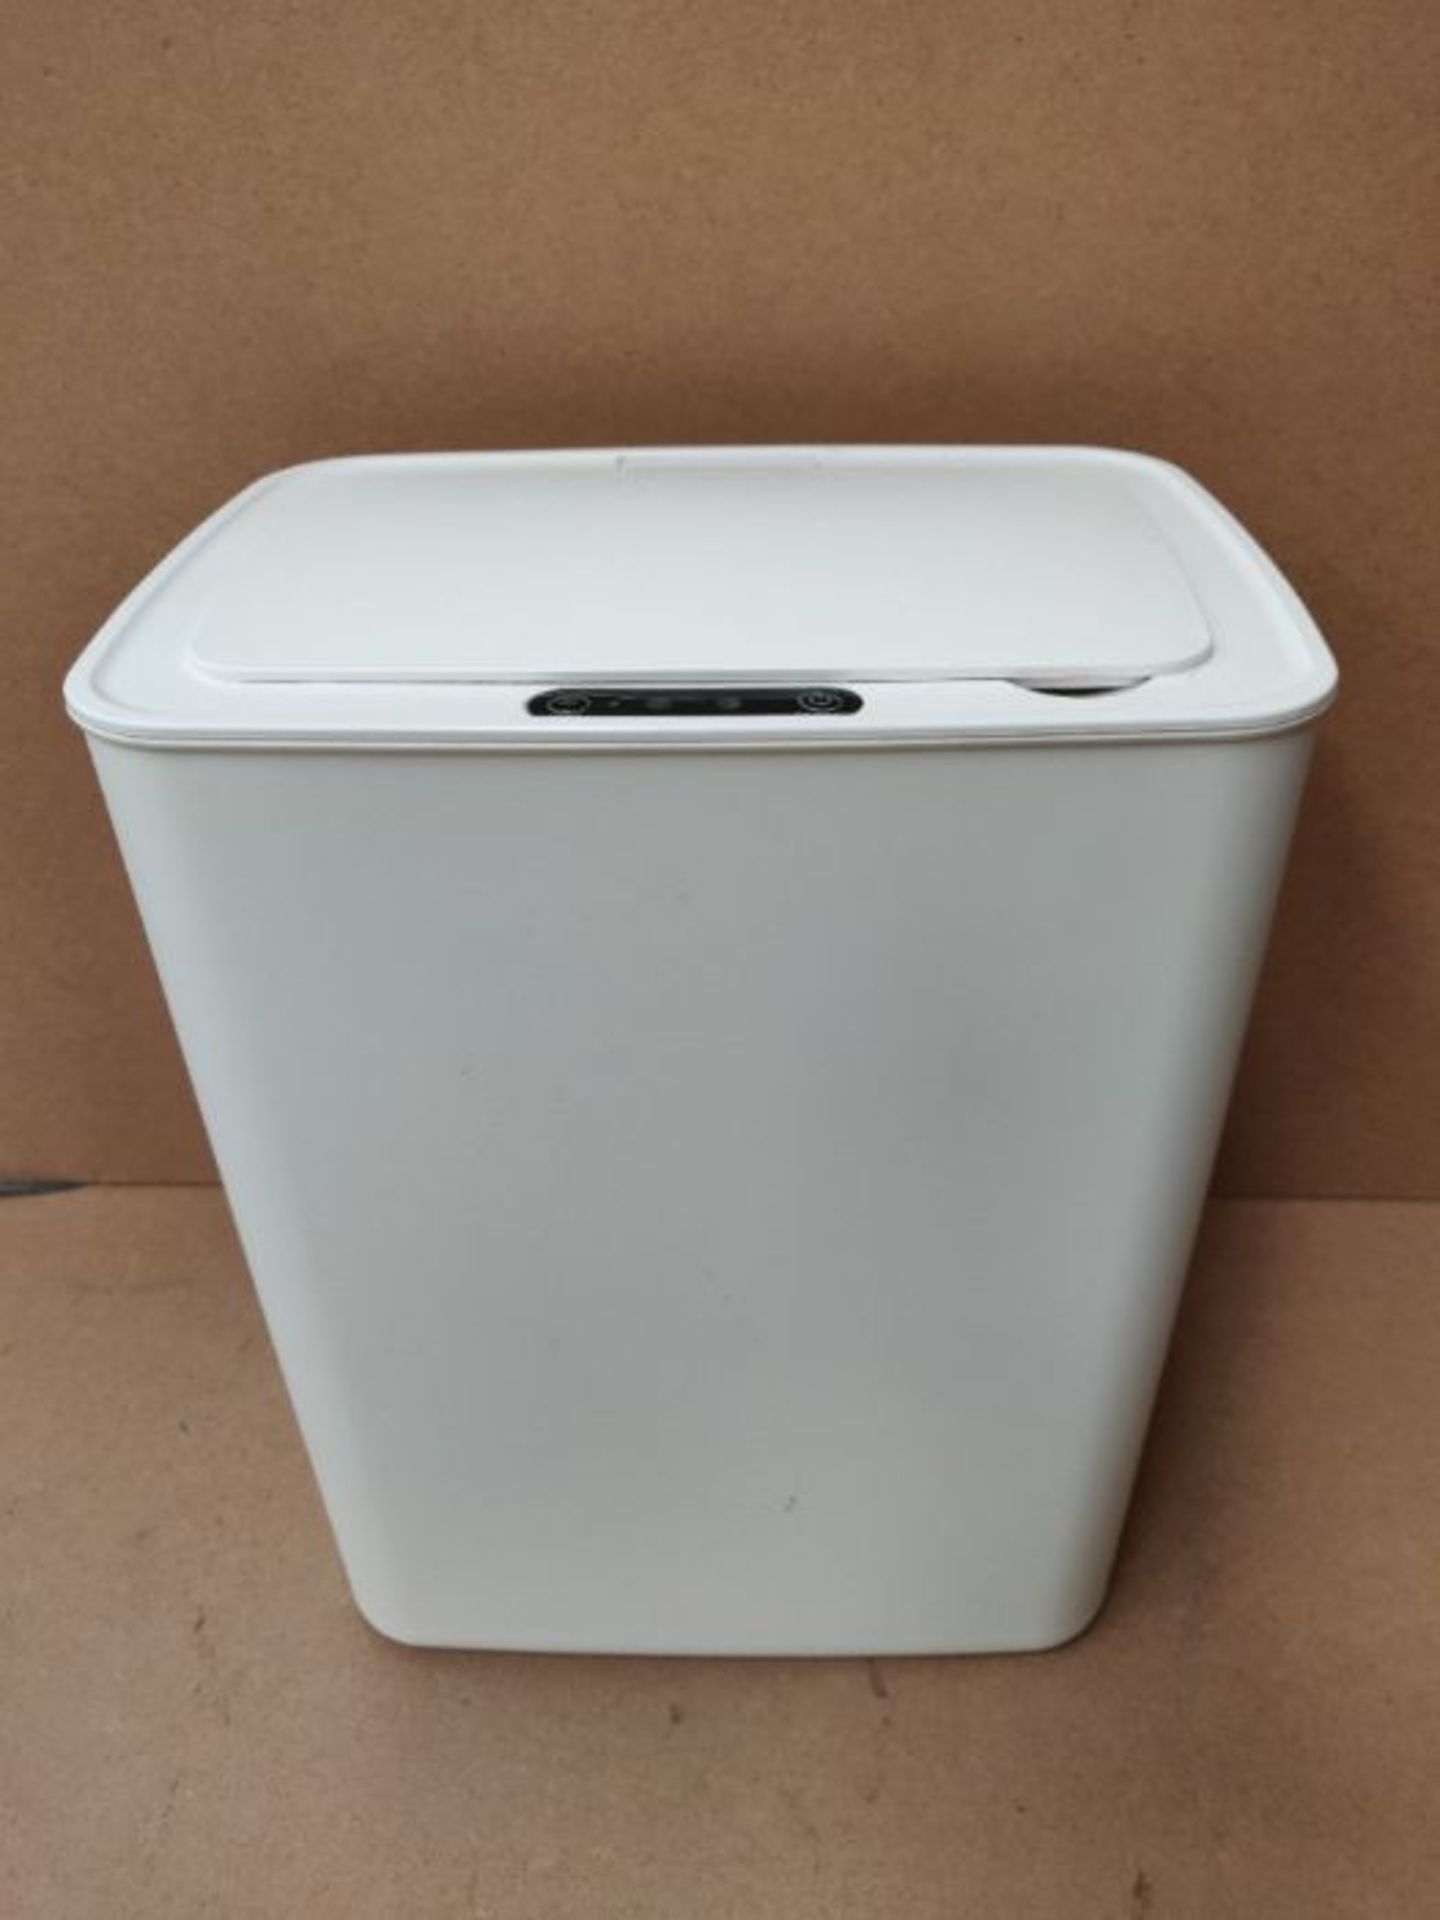 Automatic Touchless Infrared Motion Sensor Bin 14L Large Capacity Trash Can with Lid S - Image 3 of 3